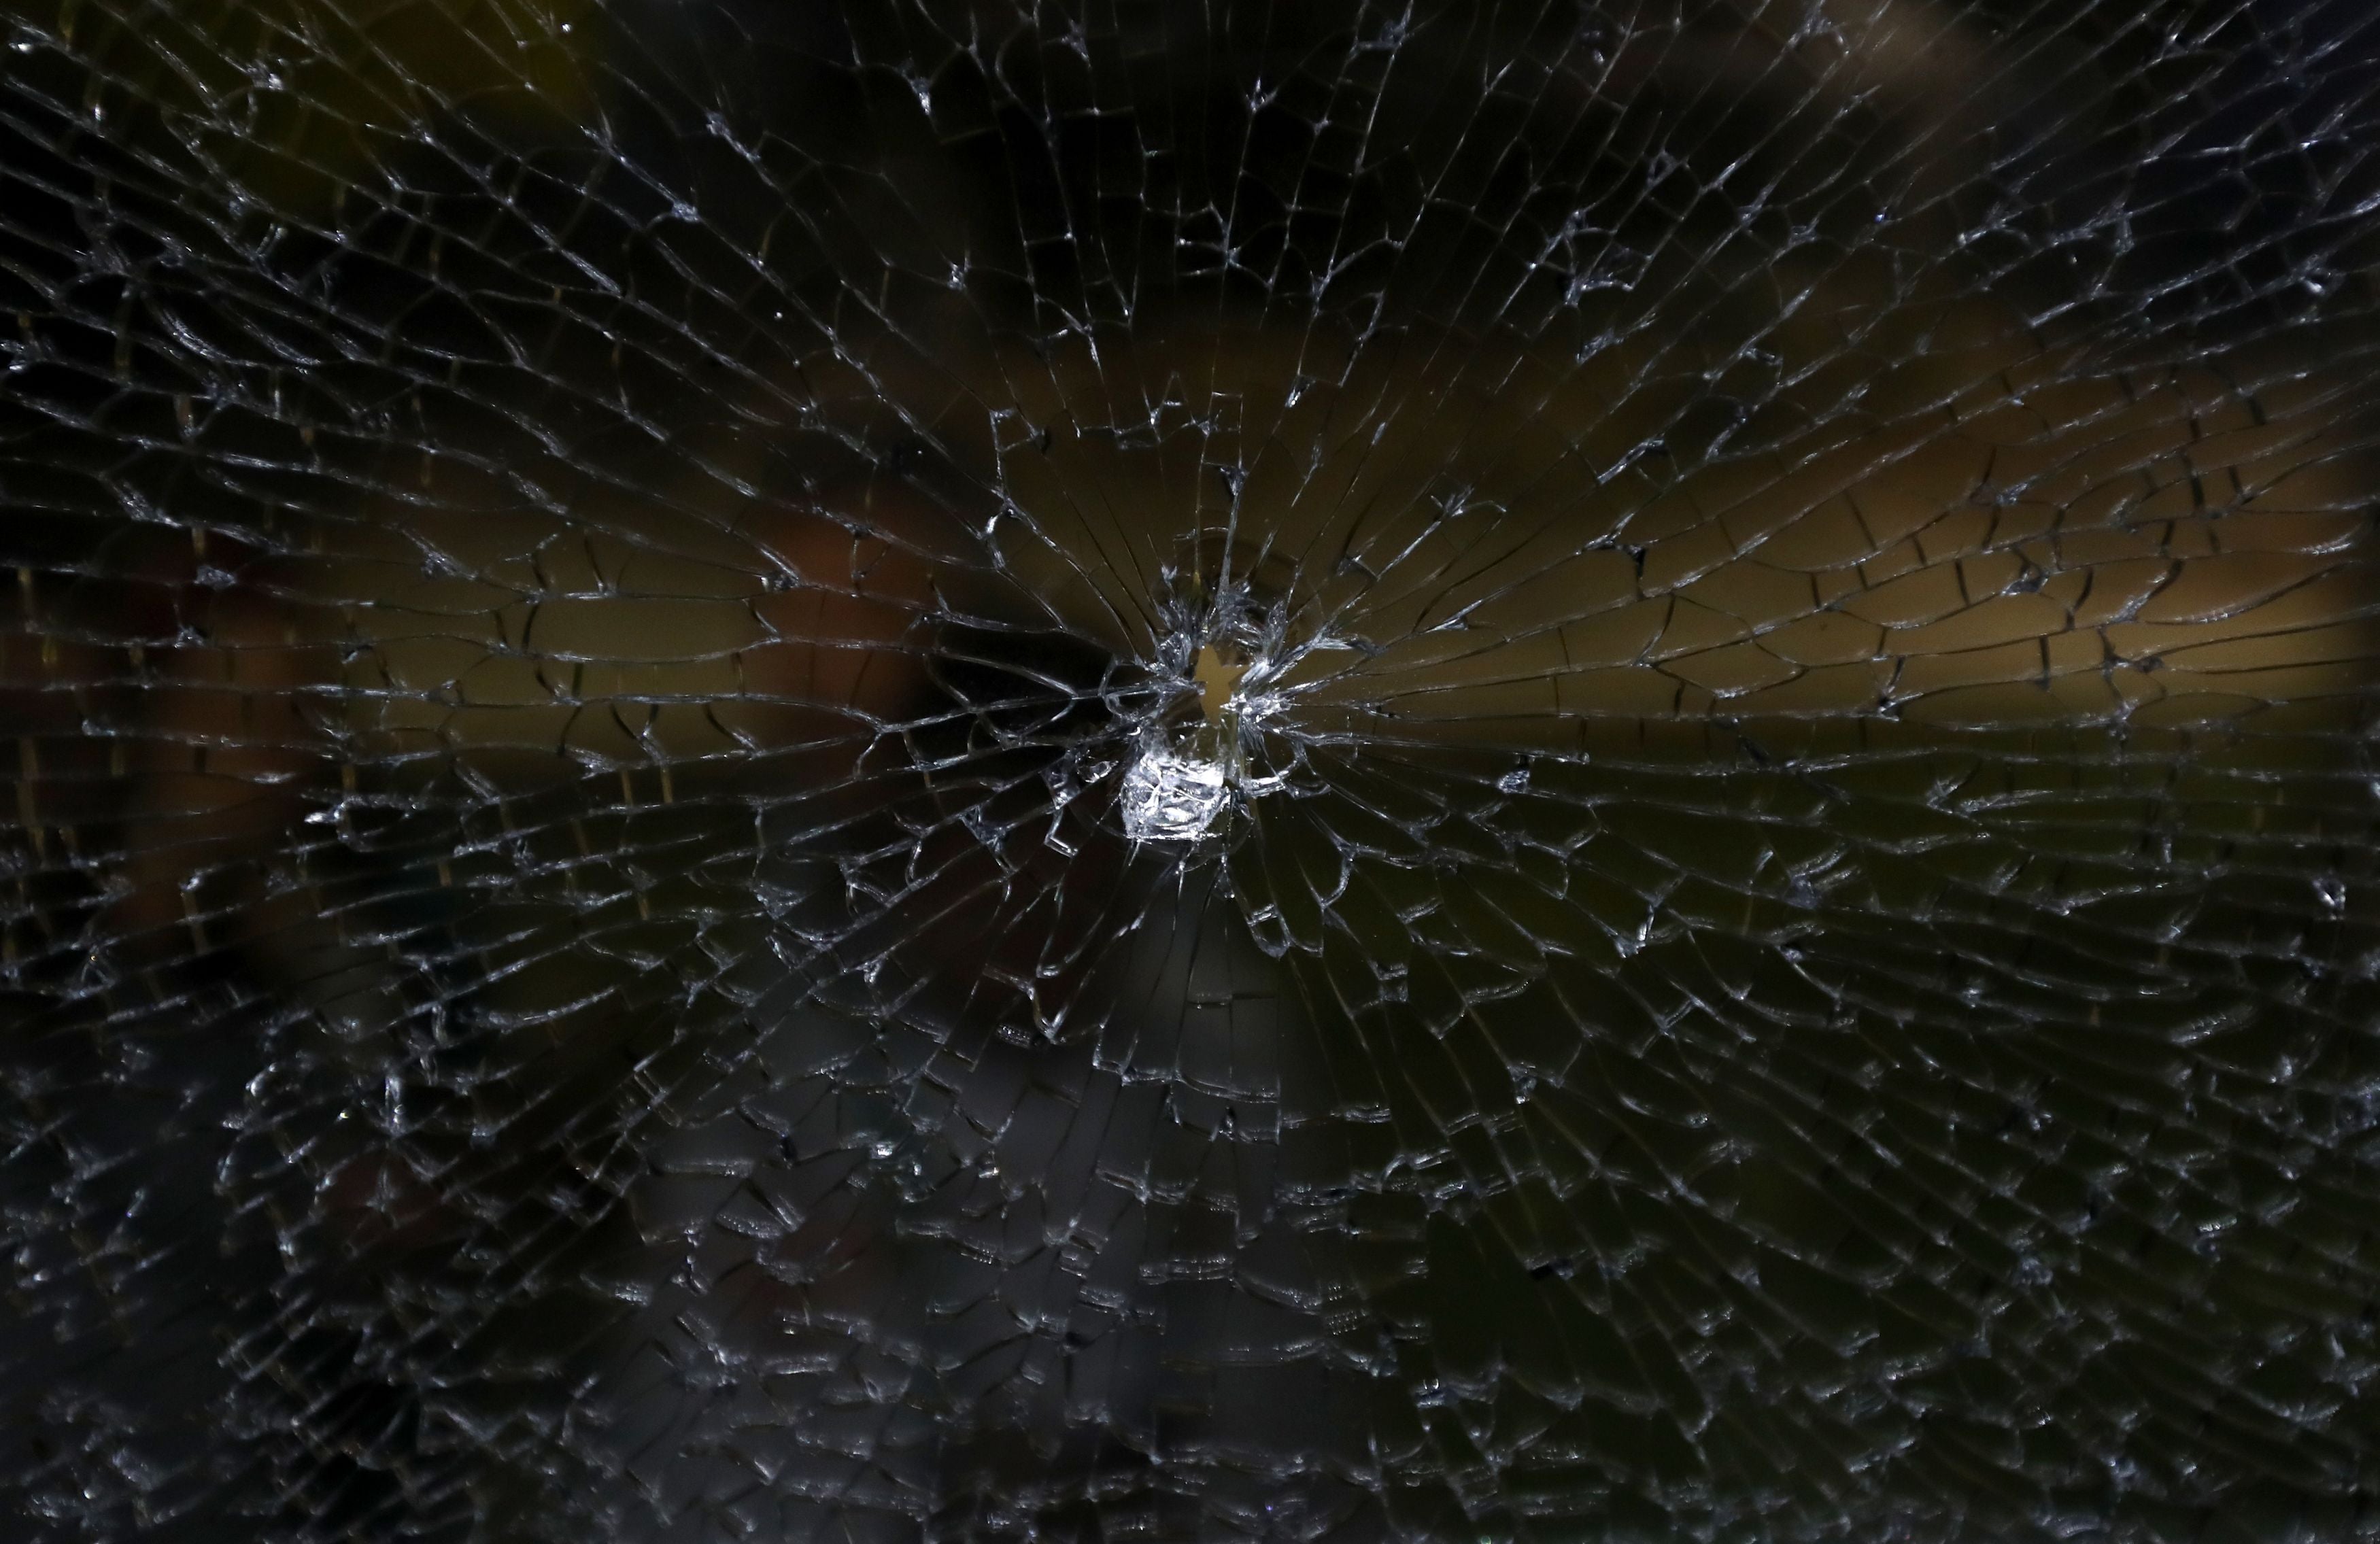 Damage to one of the bus windows, thought to have been caused by a gunshot. Picture: David Davies/PA Wire